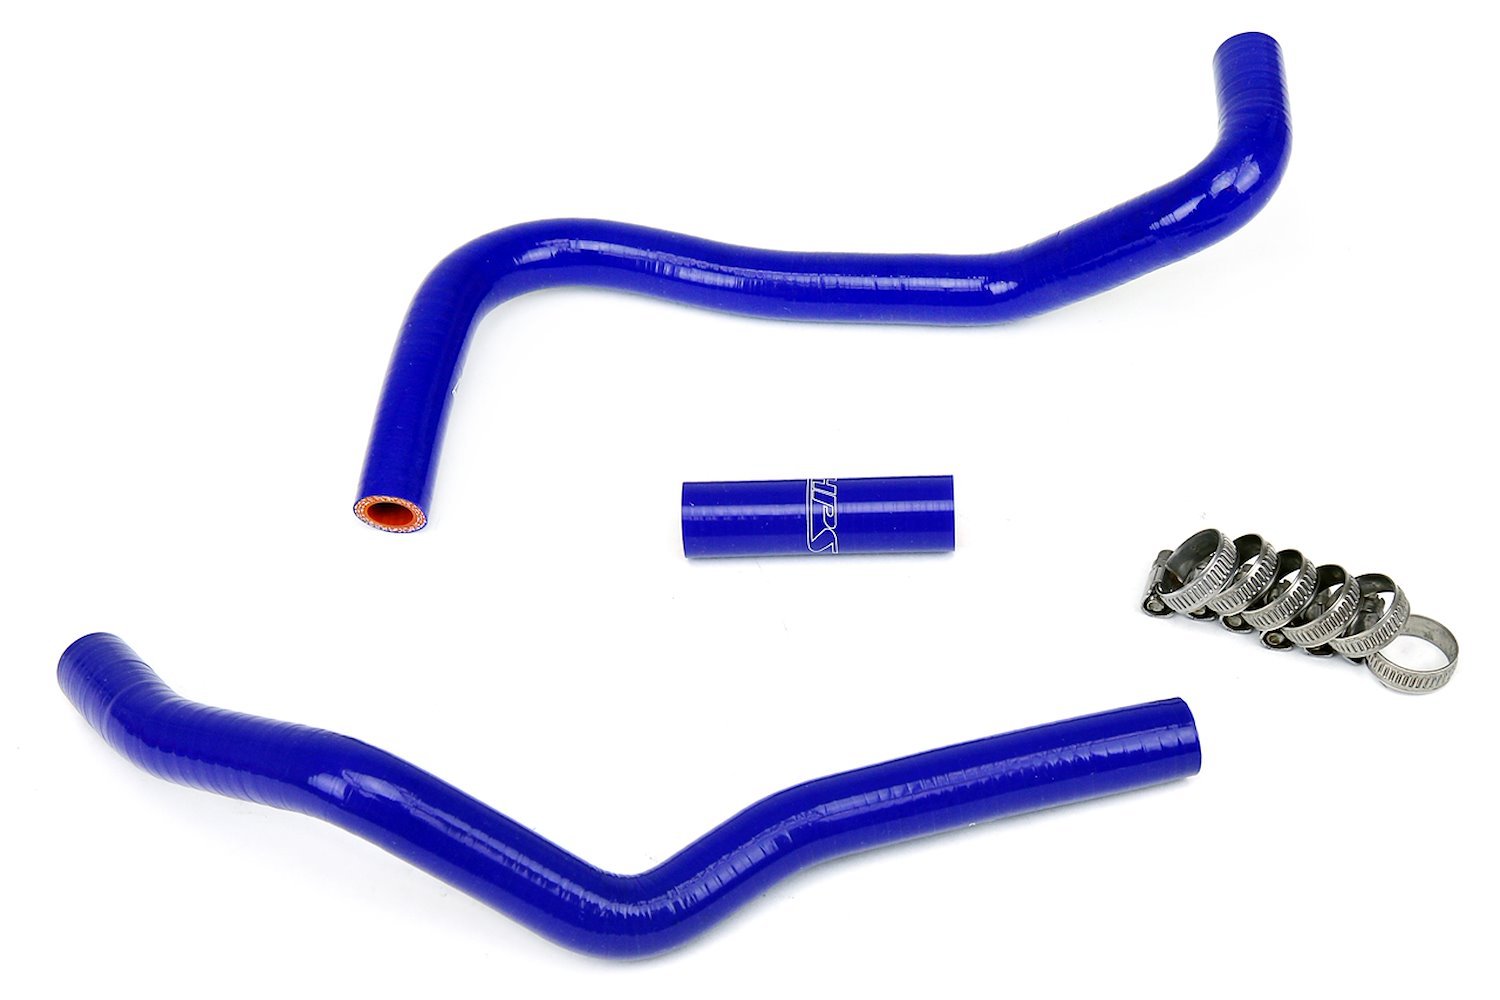 57-1282-BLUE Heater Hose Kit, High-Temp 3-Ply Reinforced Silicone, Replace OEM Rubber Heater Coolant Hoses